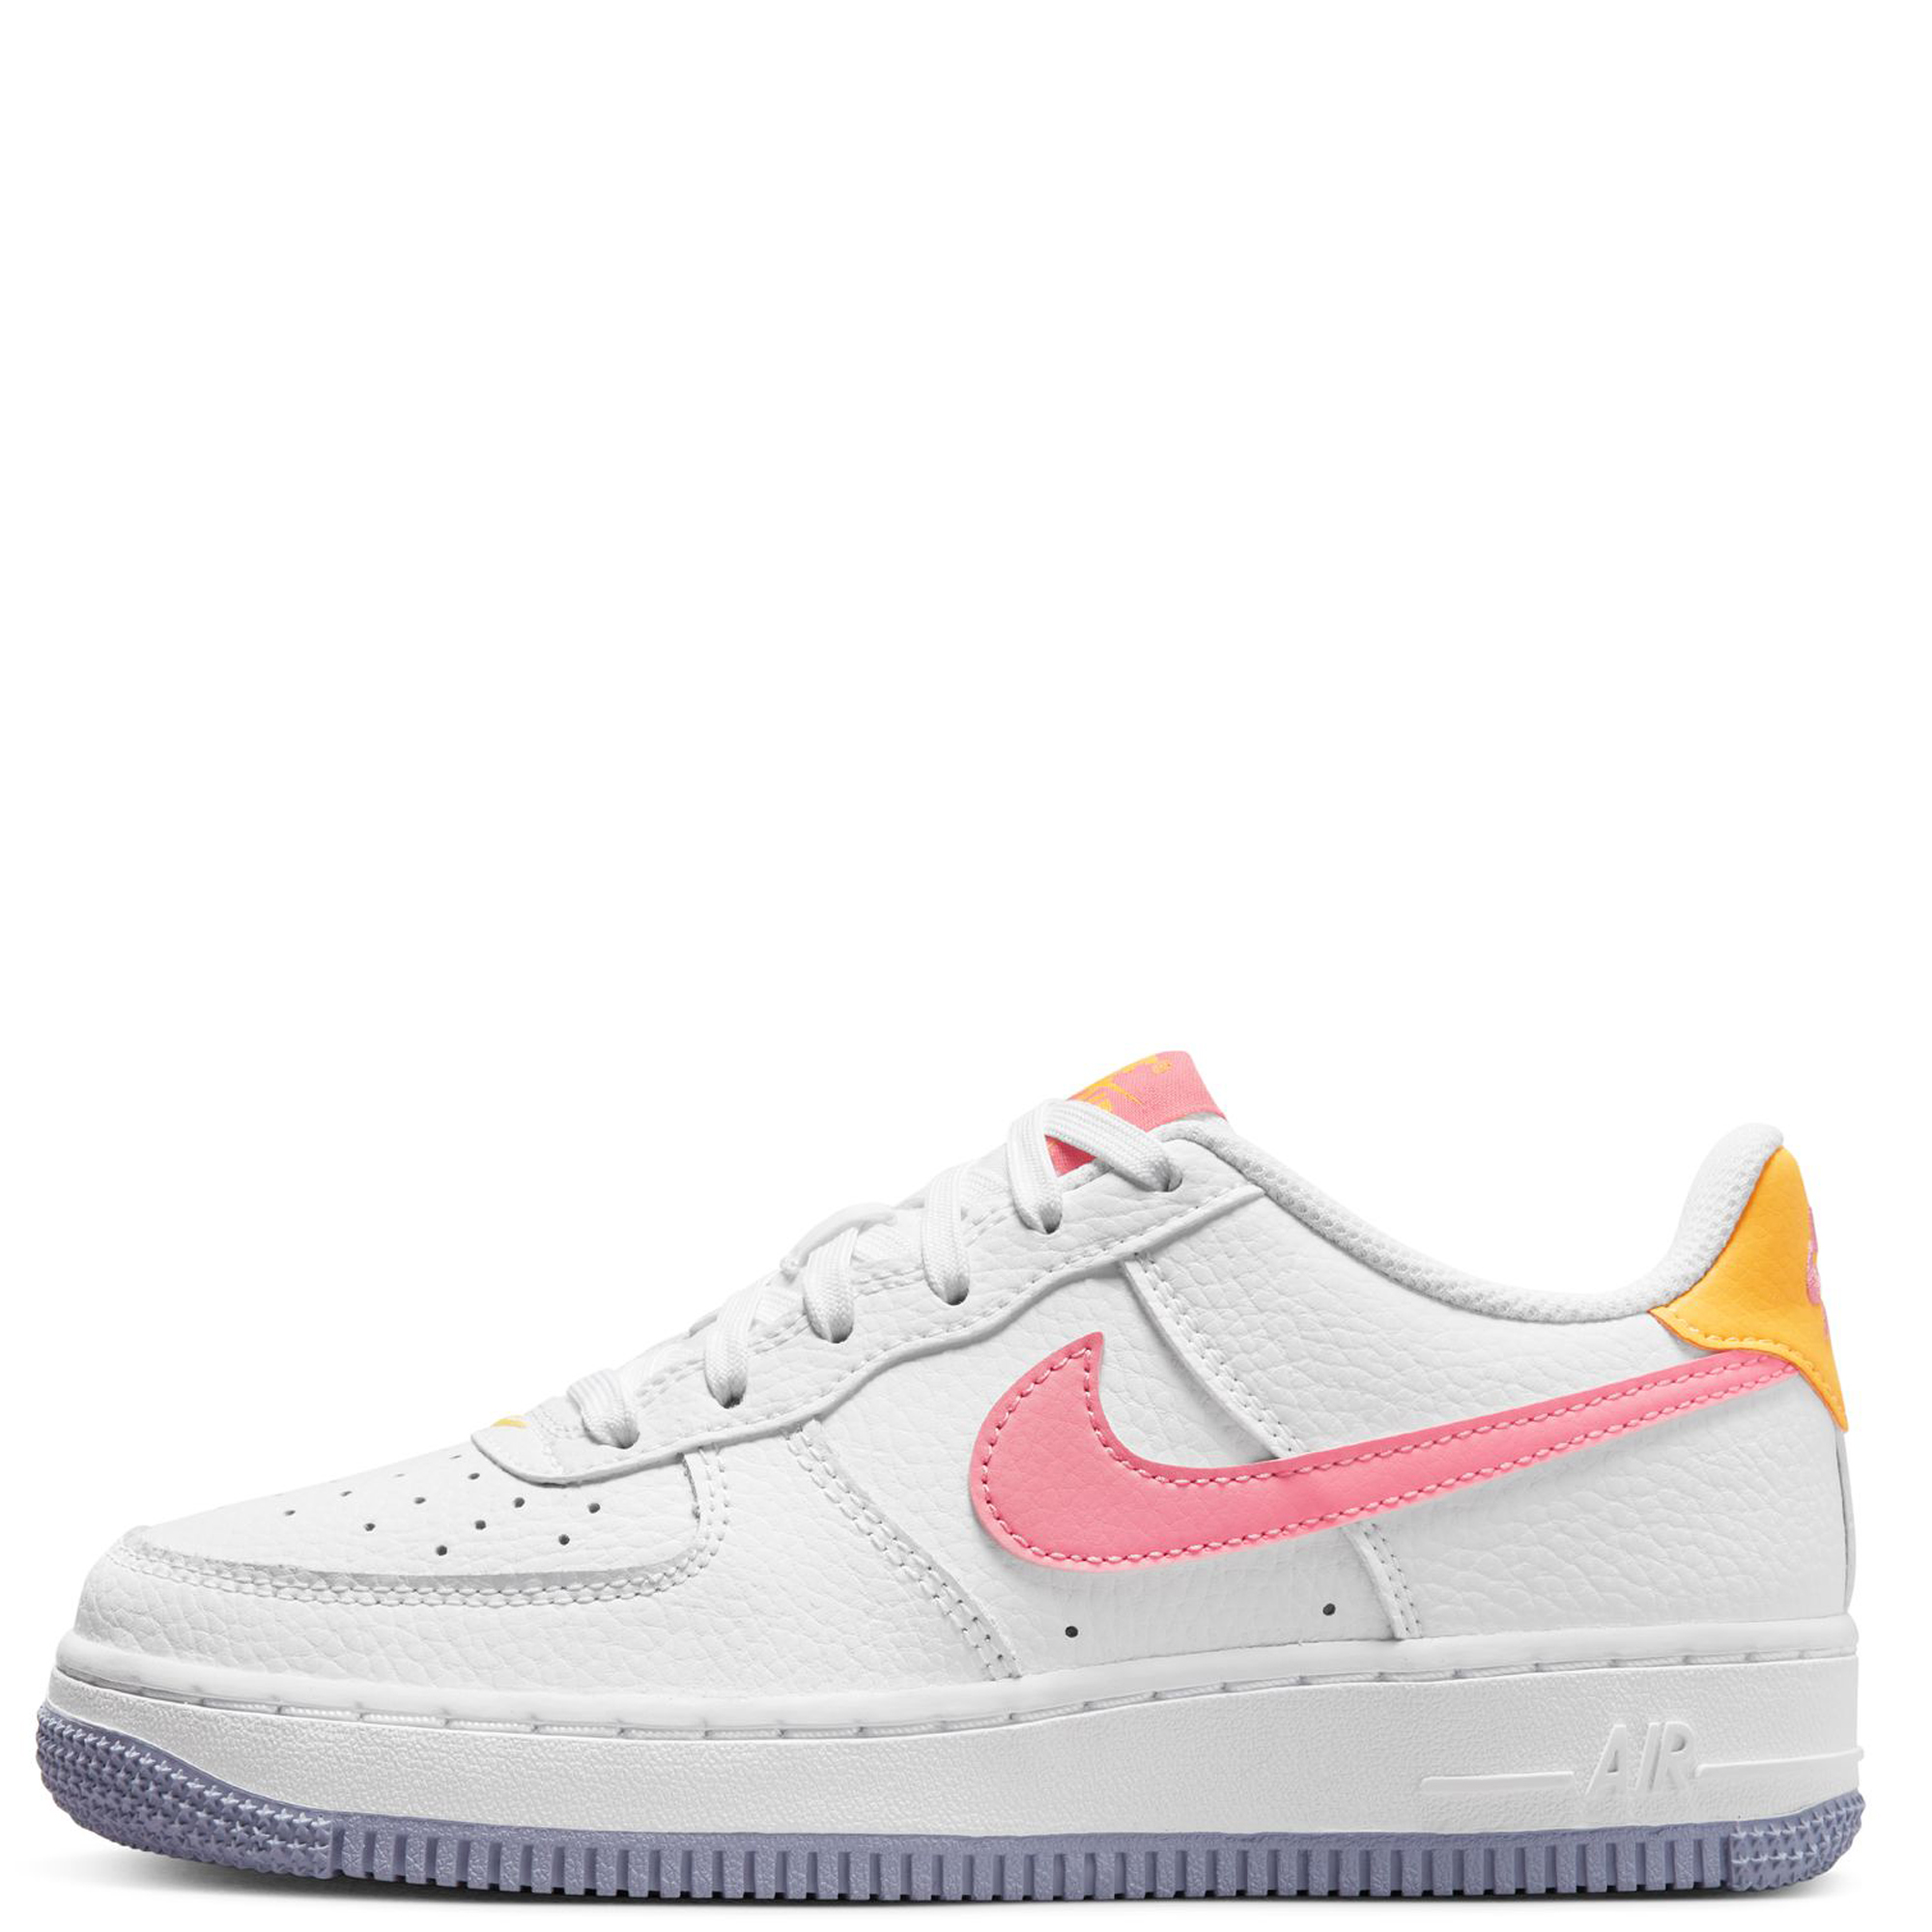 Nike Airforce High Ankle Shoes for Men, Size: 7-10